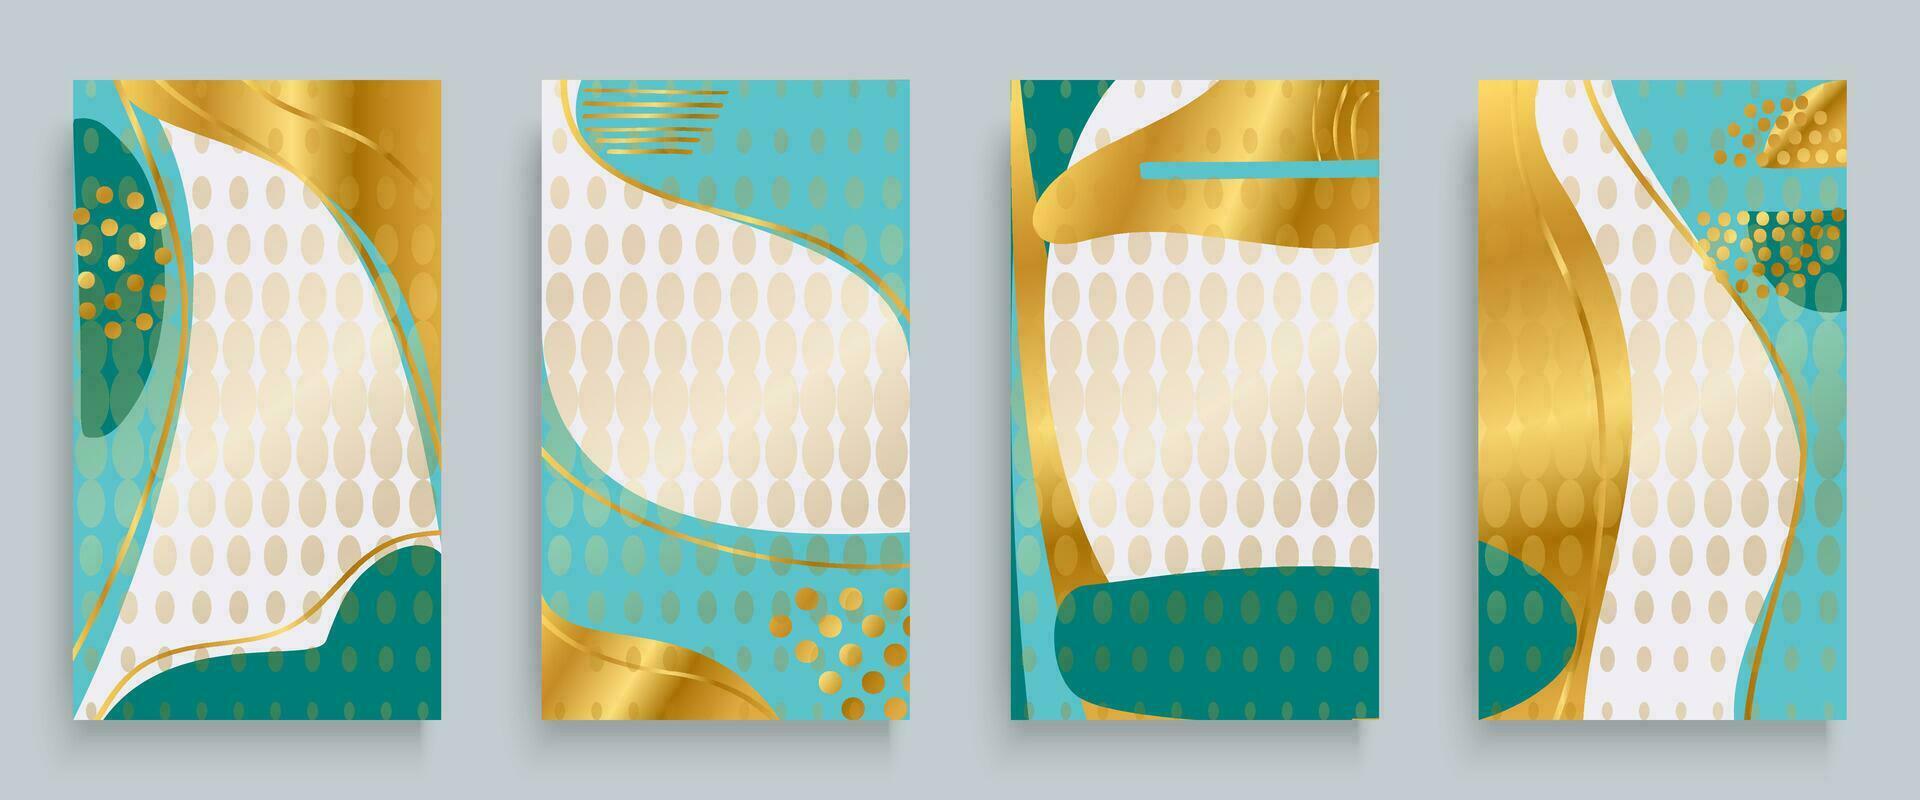 Happy celebration greeting card in empty abstract background for Social media, story, post, poster, invitation, party, banner, event, flyer, print. Modern design vector illustration set in pastel gold